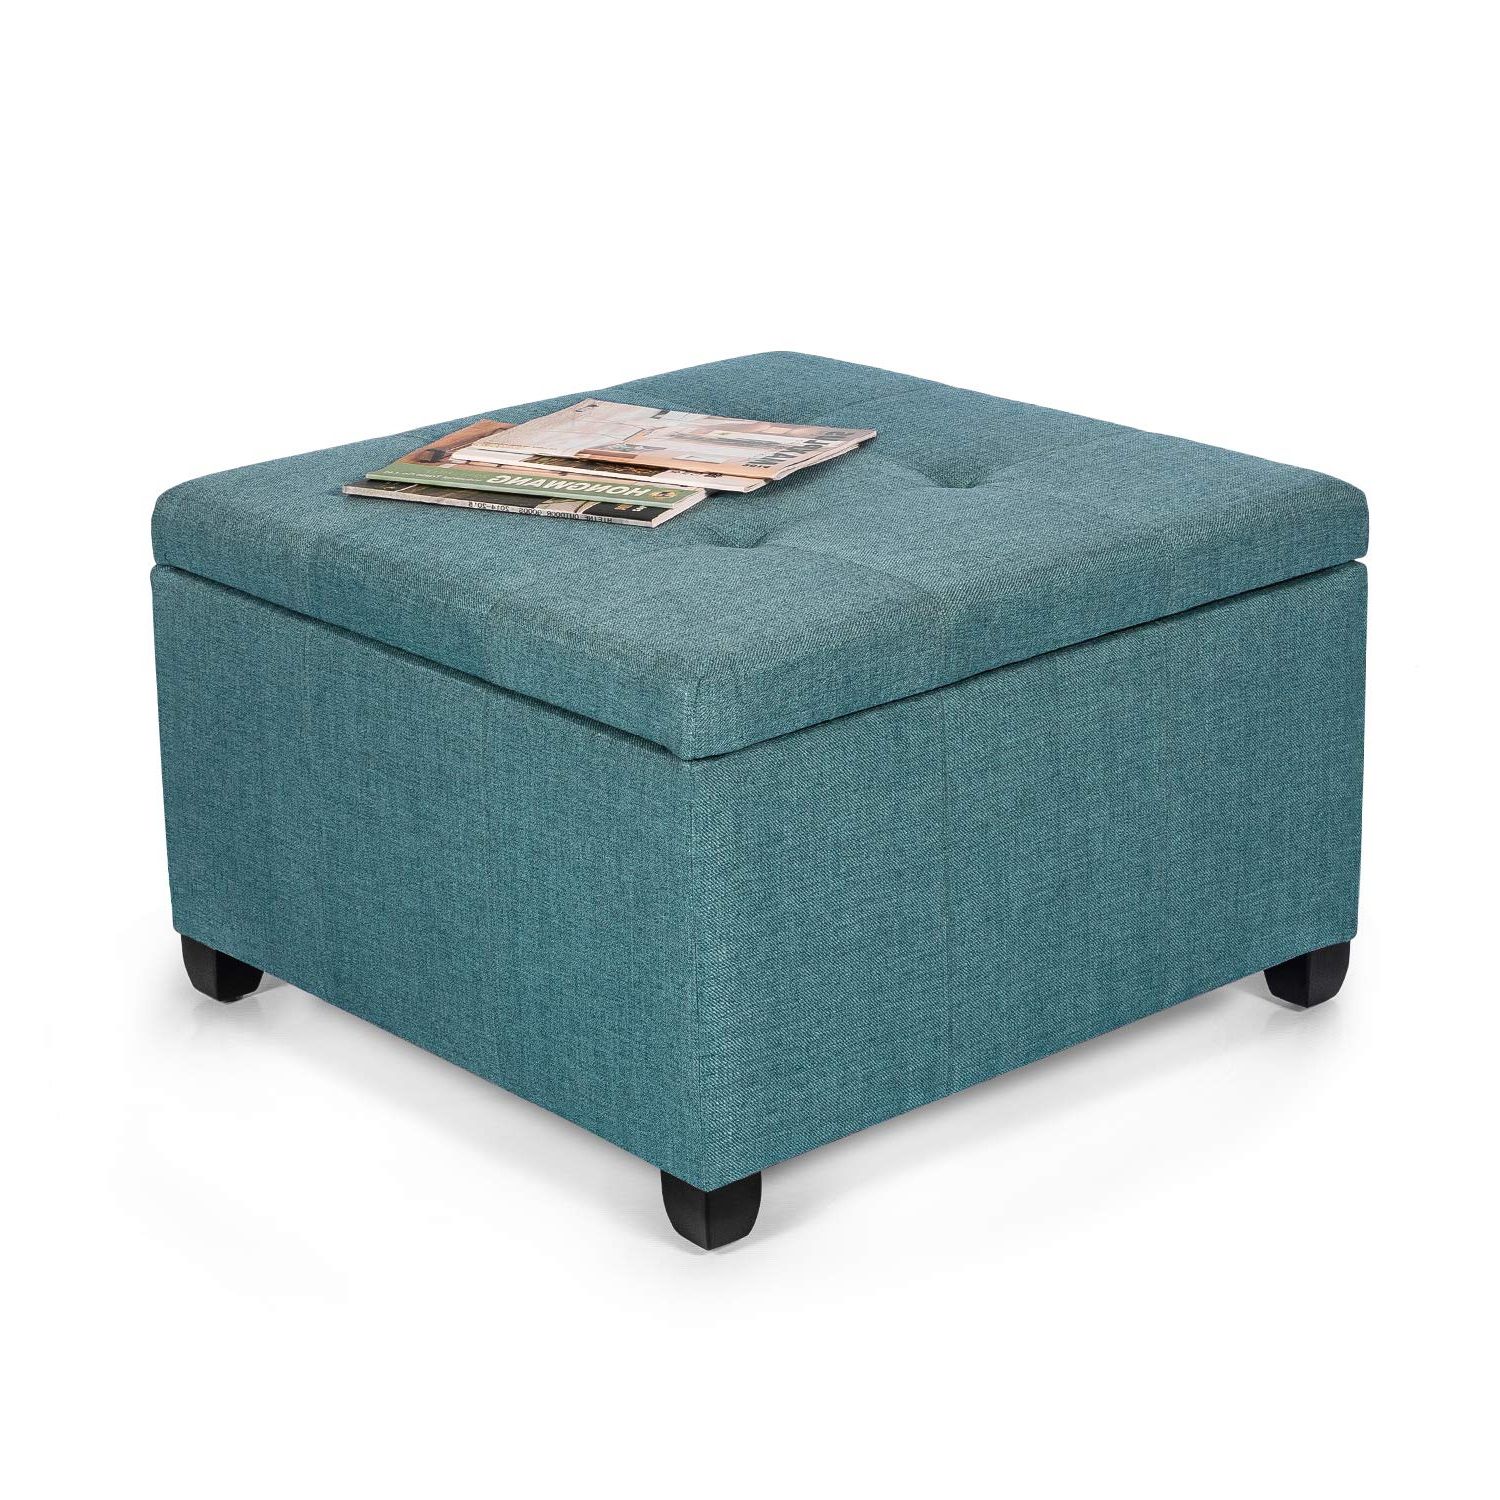 Most Current Homebeez Classic Square Seat Tufted Fabric Ottoman With Storage Chest With Charcoal Fabric Tufted Storage Ottomans (View 7 of 10)